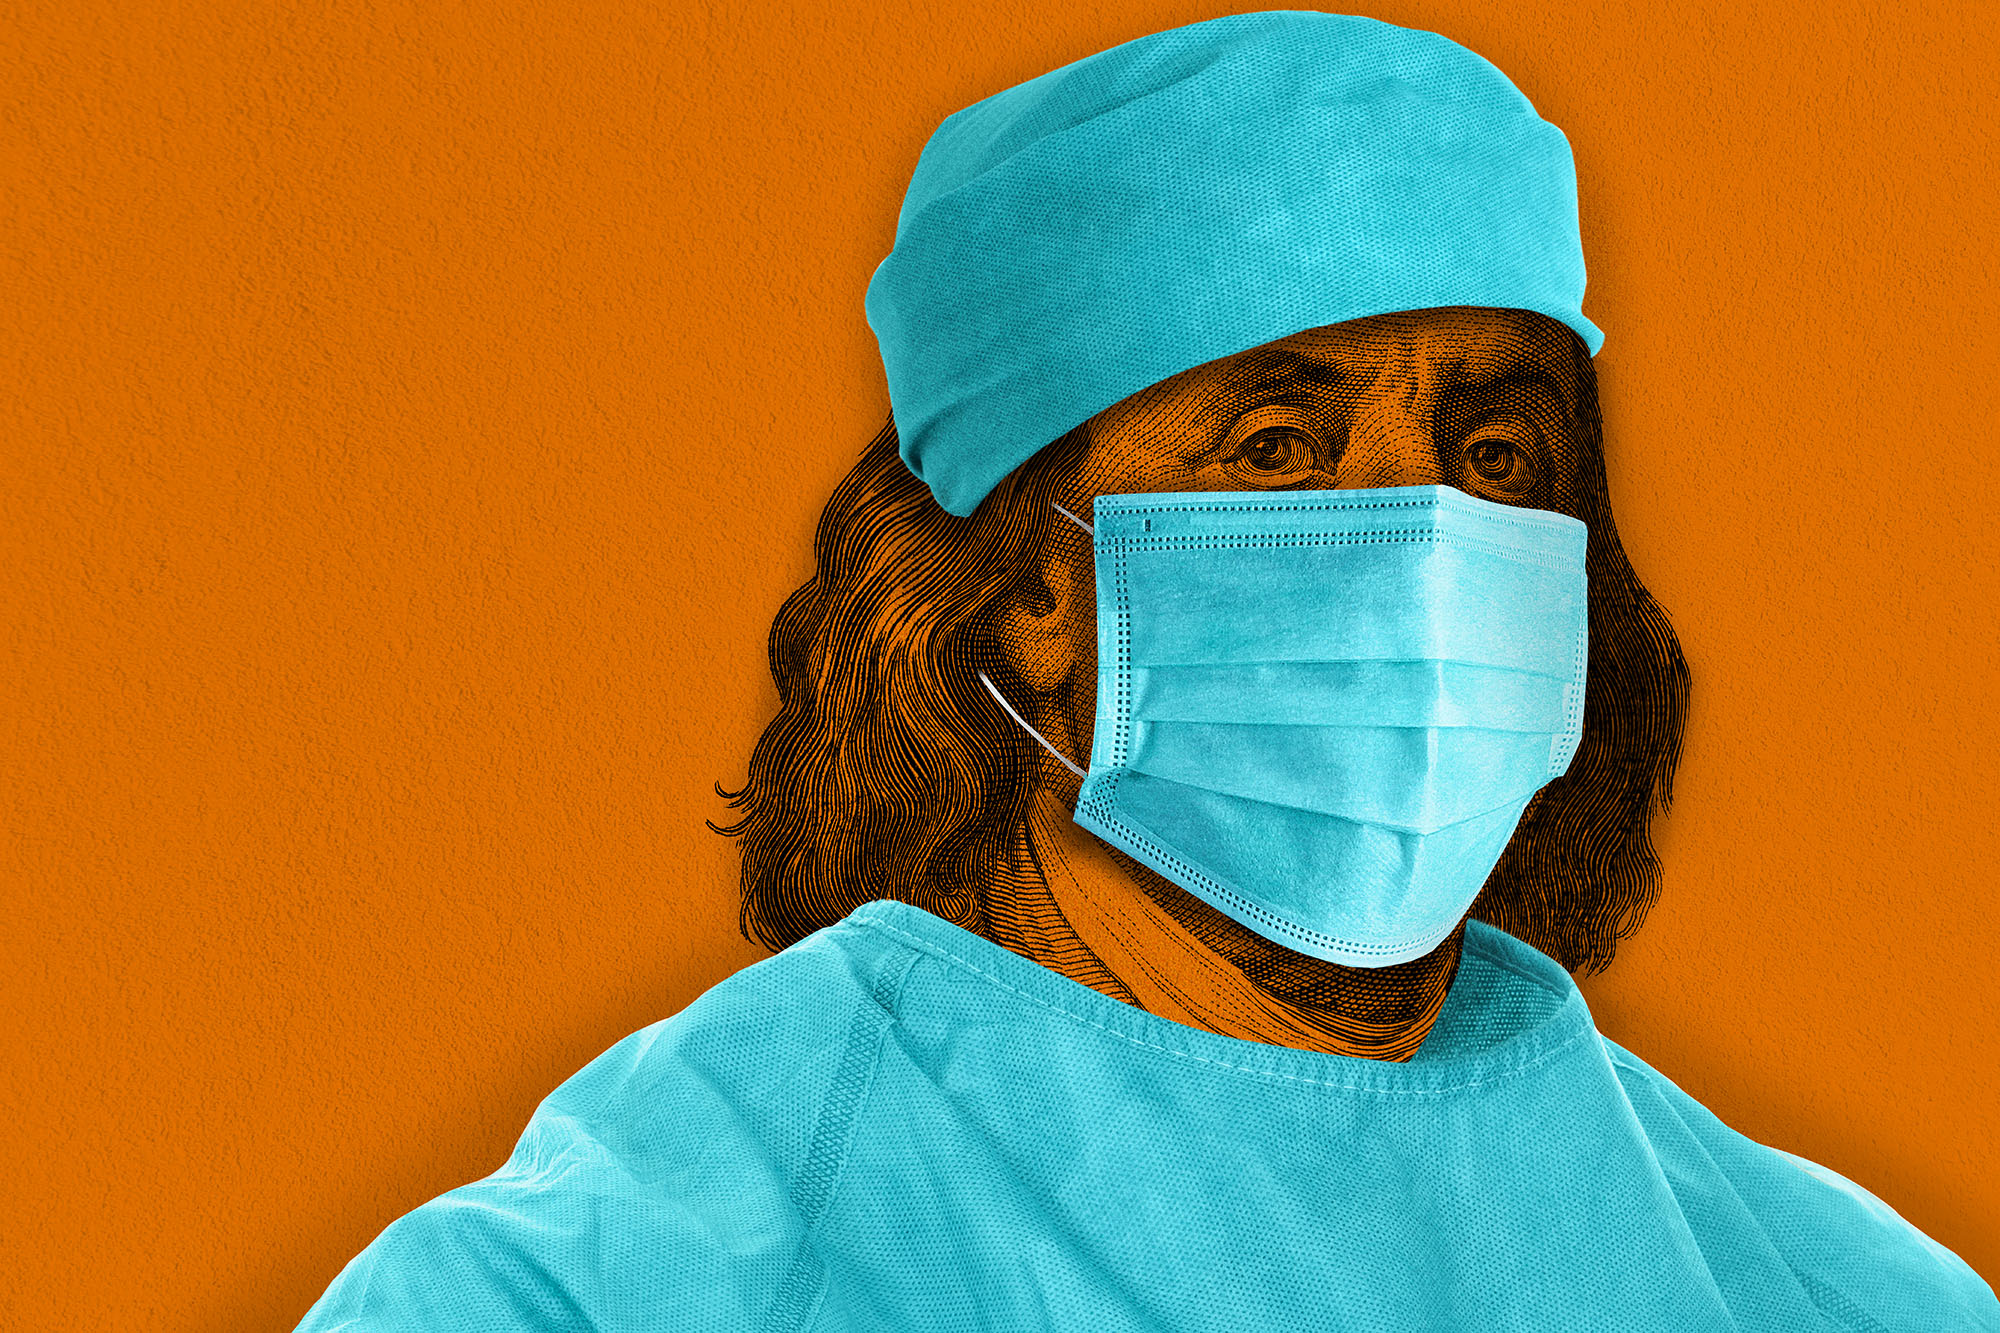 Illustration of Ben Franklin in a surgery hat, mask, and cover